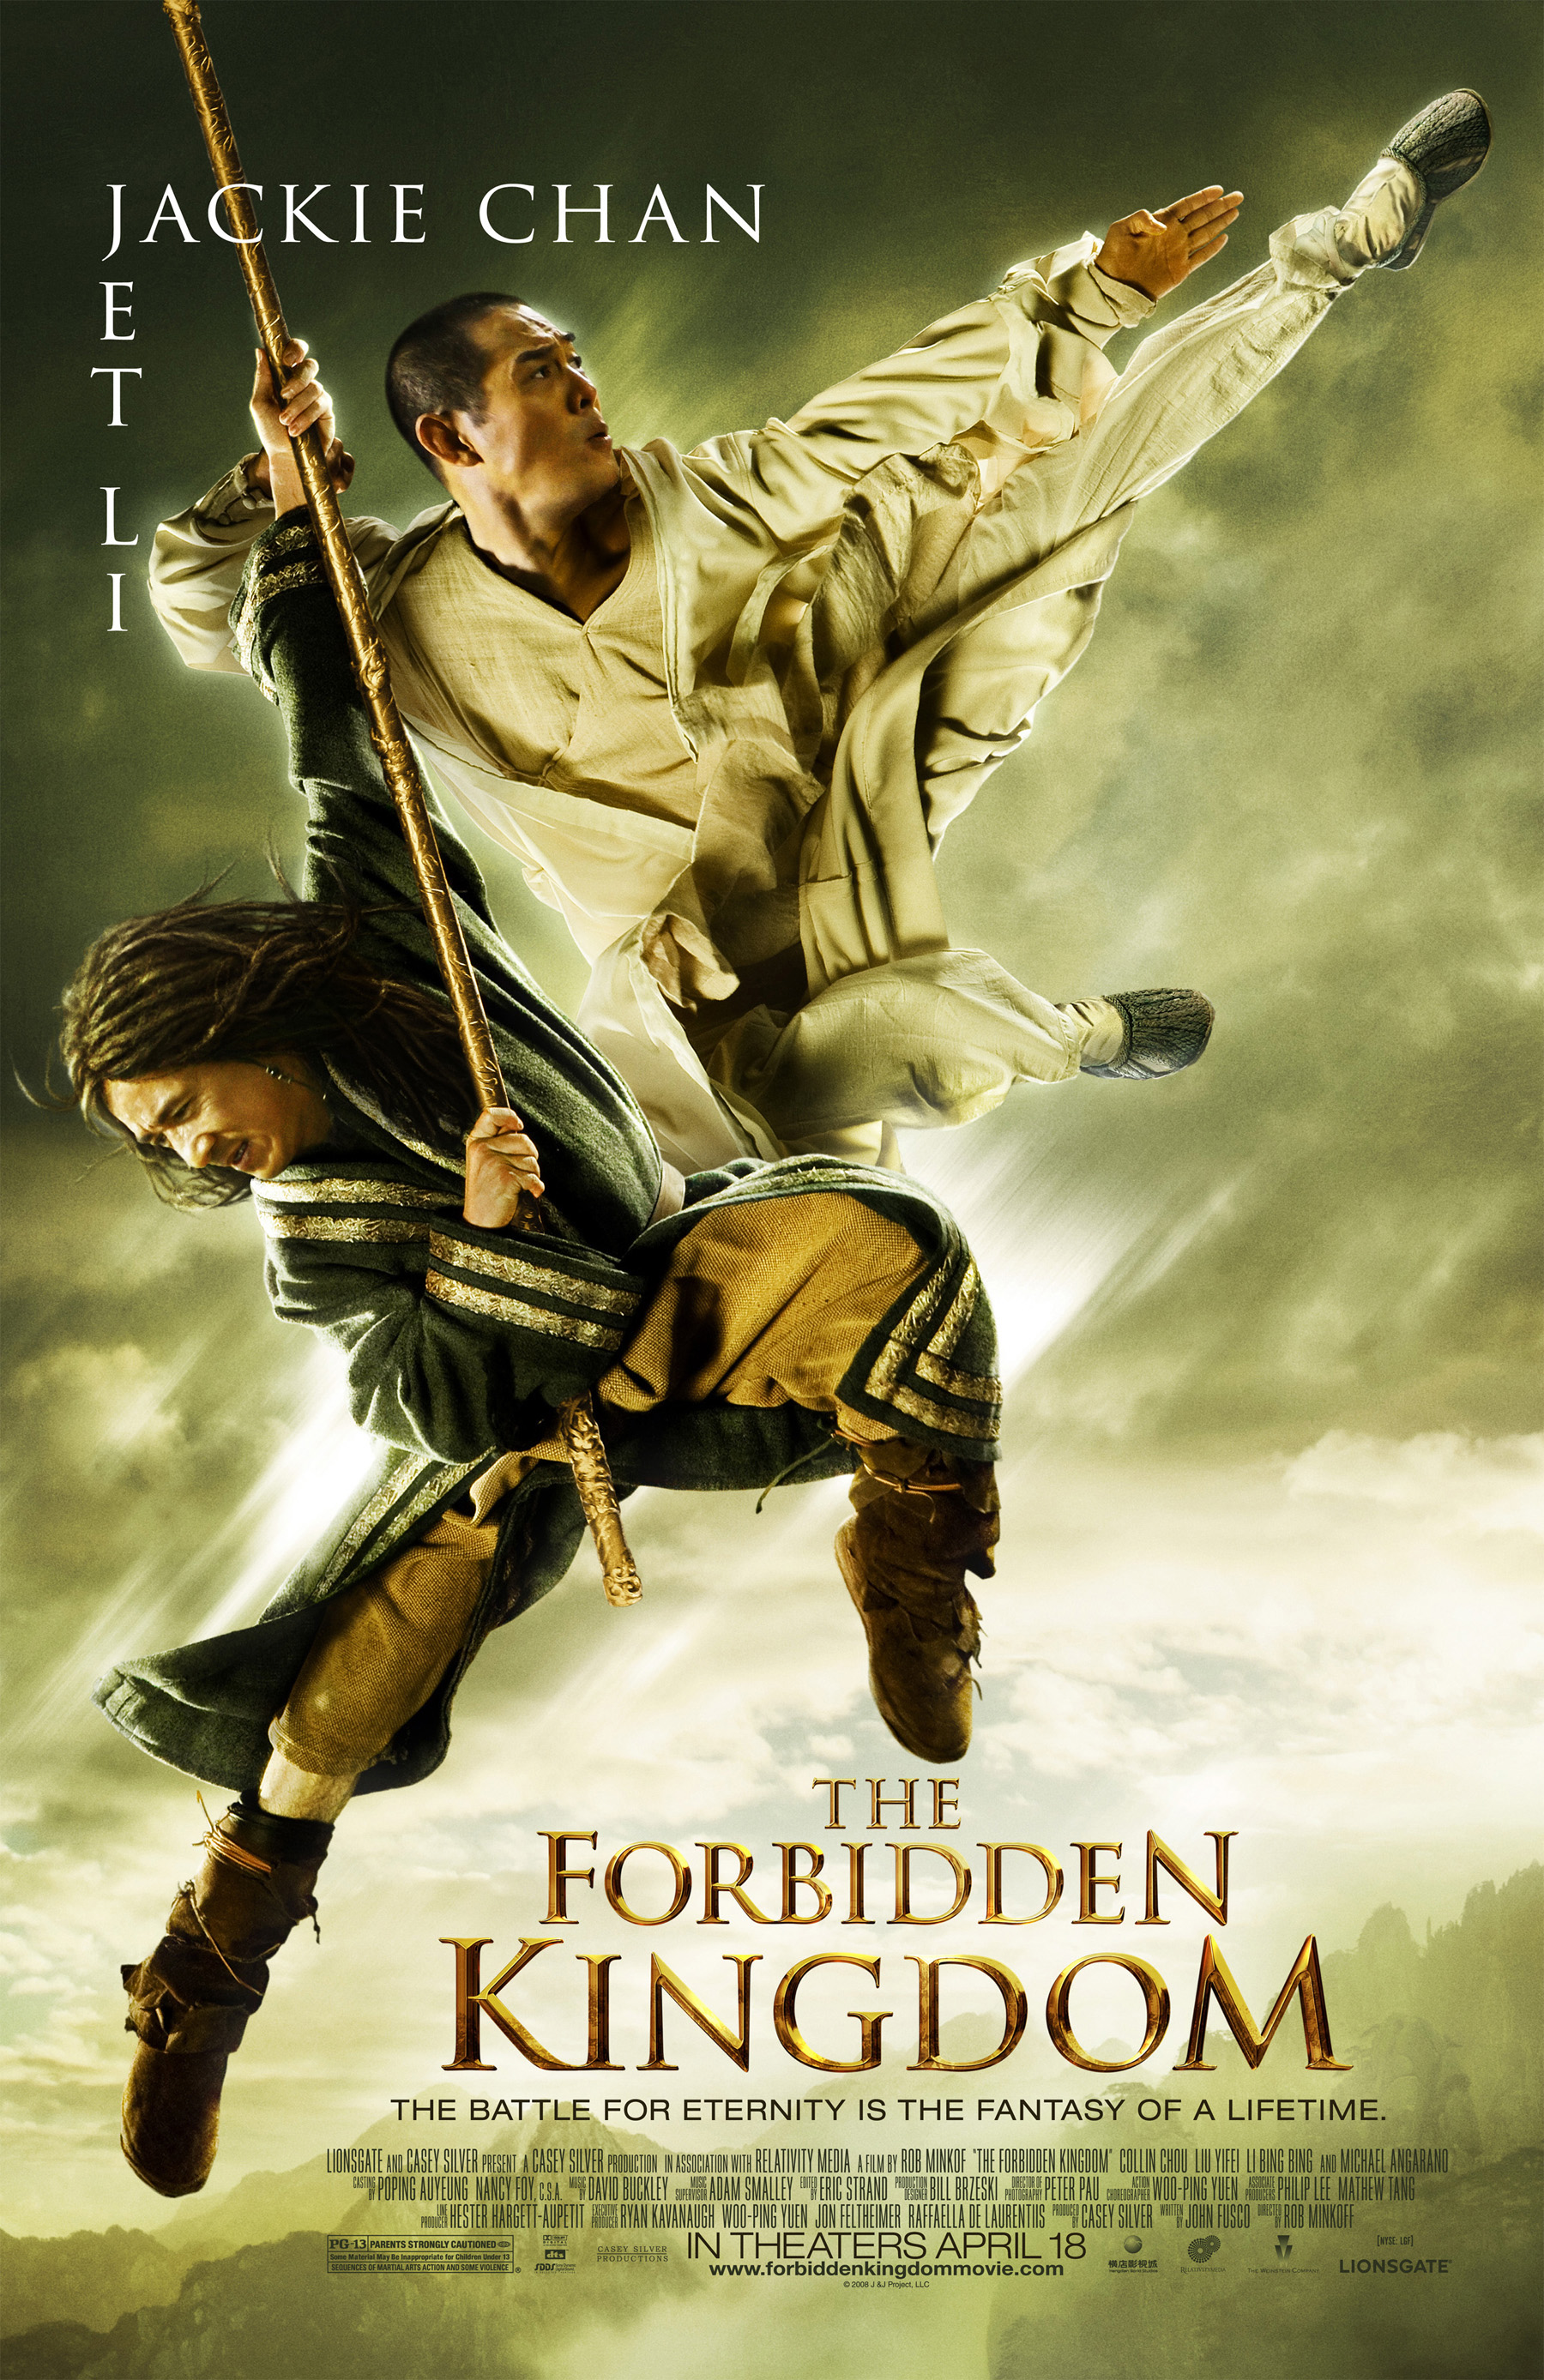 AICN Exclusive Poster Debut: THE FORBIDDEN KINGDOM!!